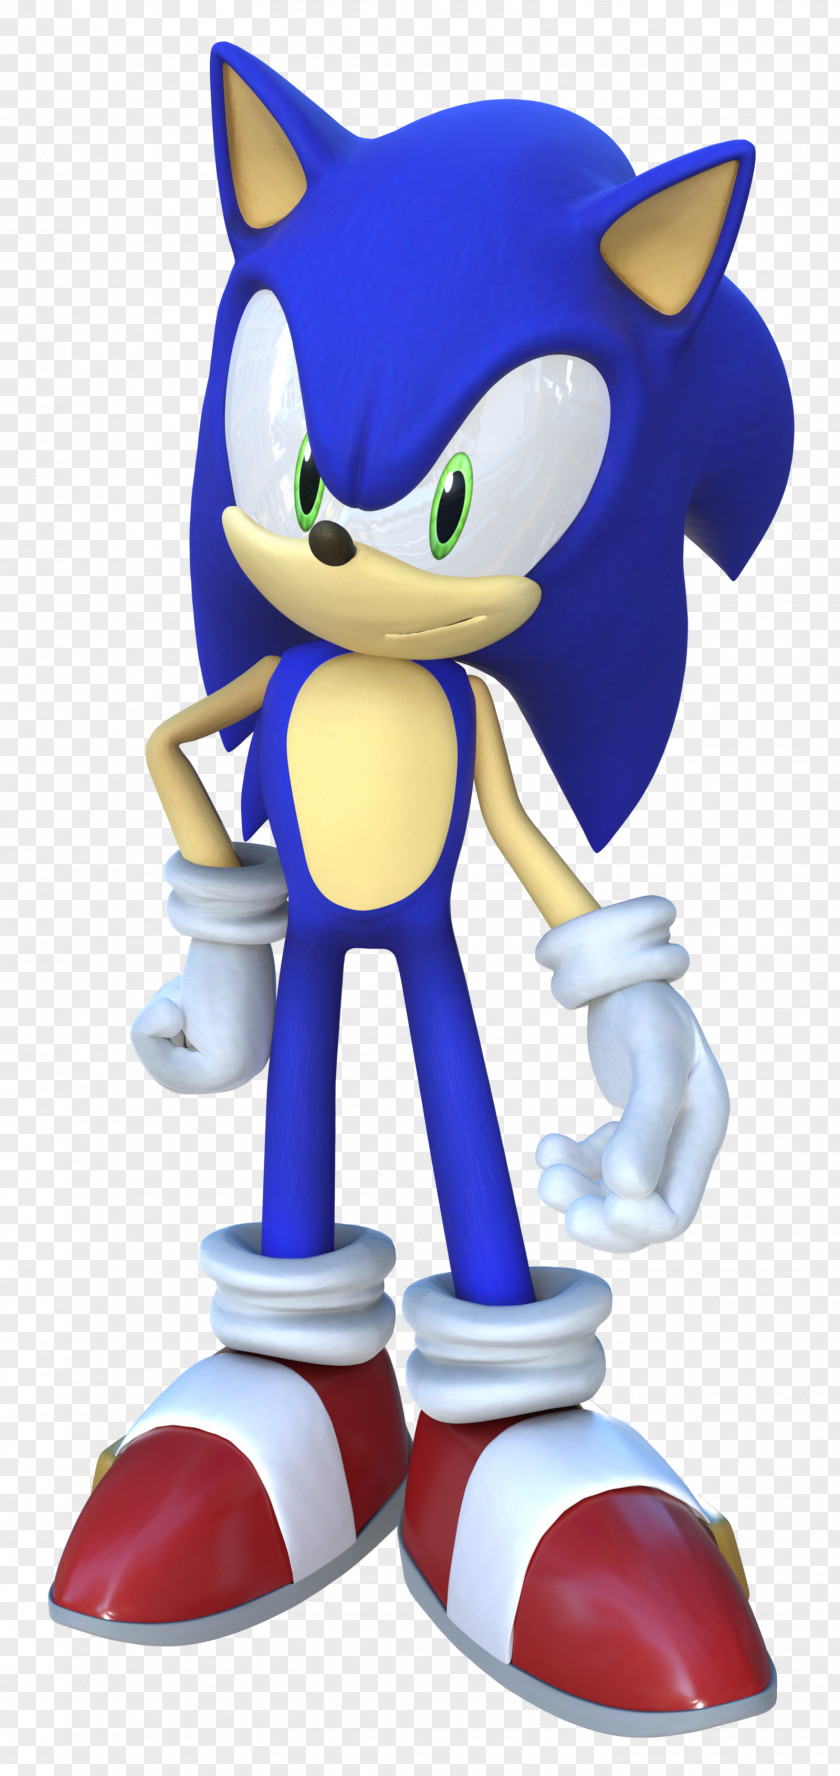 Hedgehog Sonic Unleashed The 4: Episode I Adventure 2 And Black Knight PNG